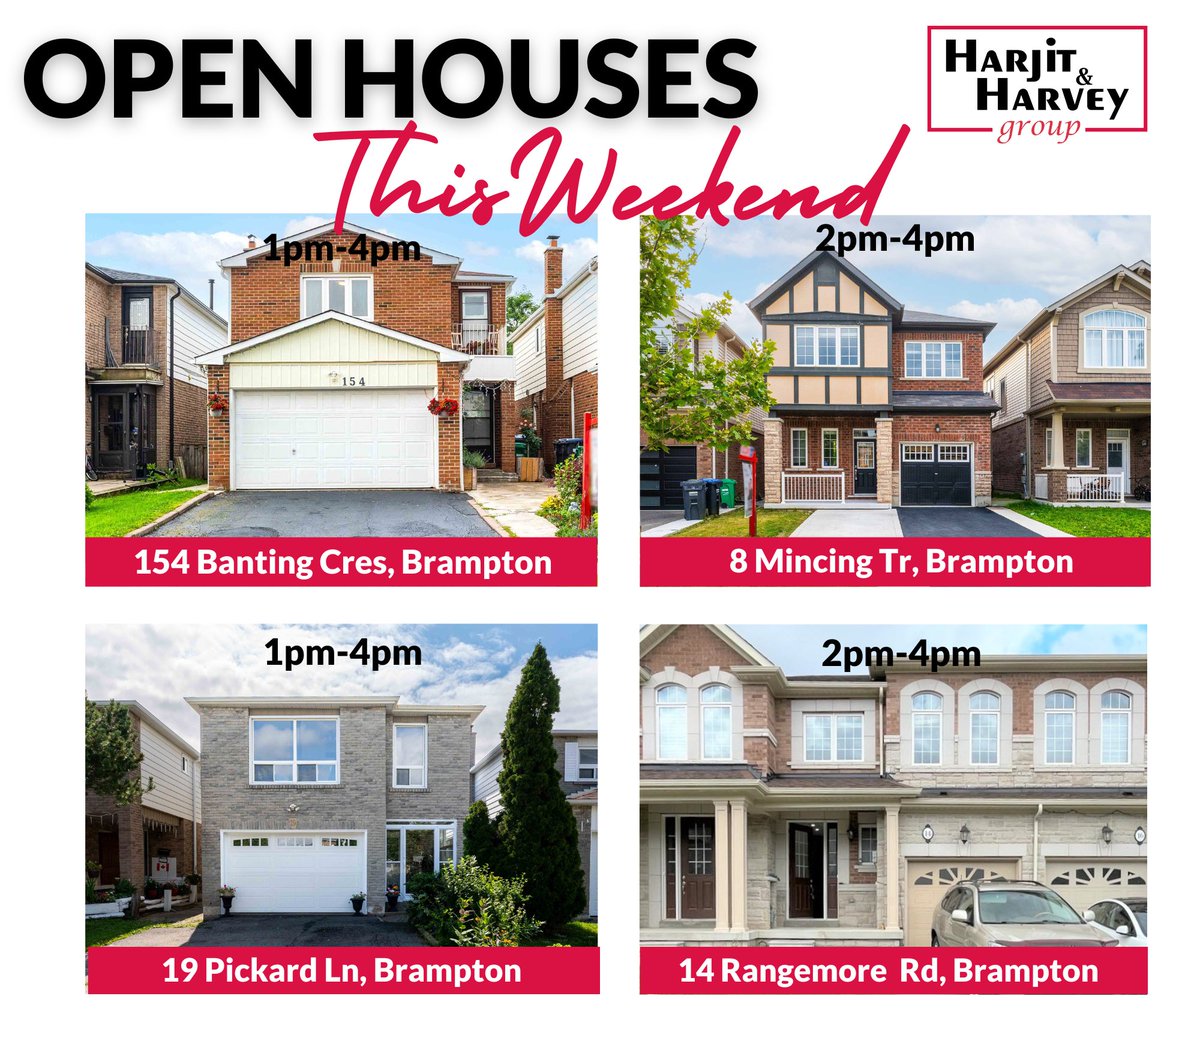 #OpenHouses in #Brampton This #Weekend! You’ll love these amazing #properties Whether you’re looking for a convenient location, a starter home, or an #investment opportunity, you’ll find something that suits your needs.#HarjitHarvey #harjitharveygroup #harjitsaini #harveysingh